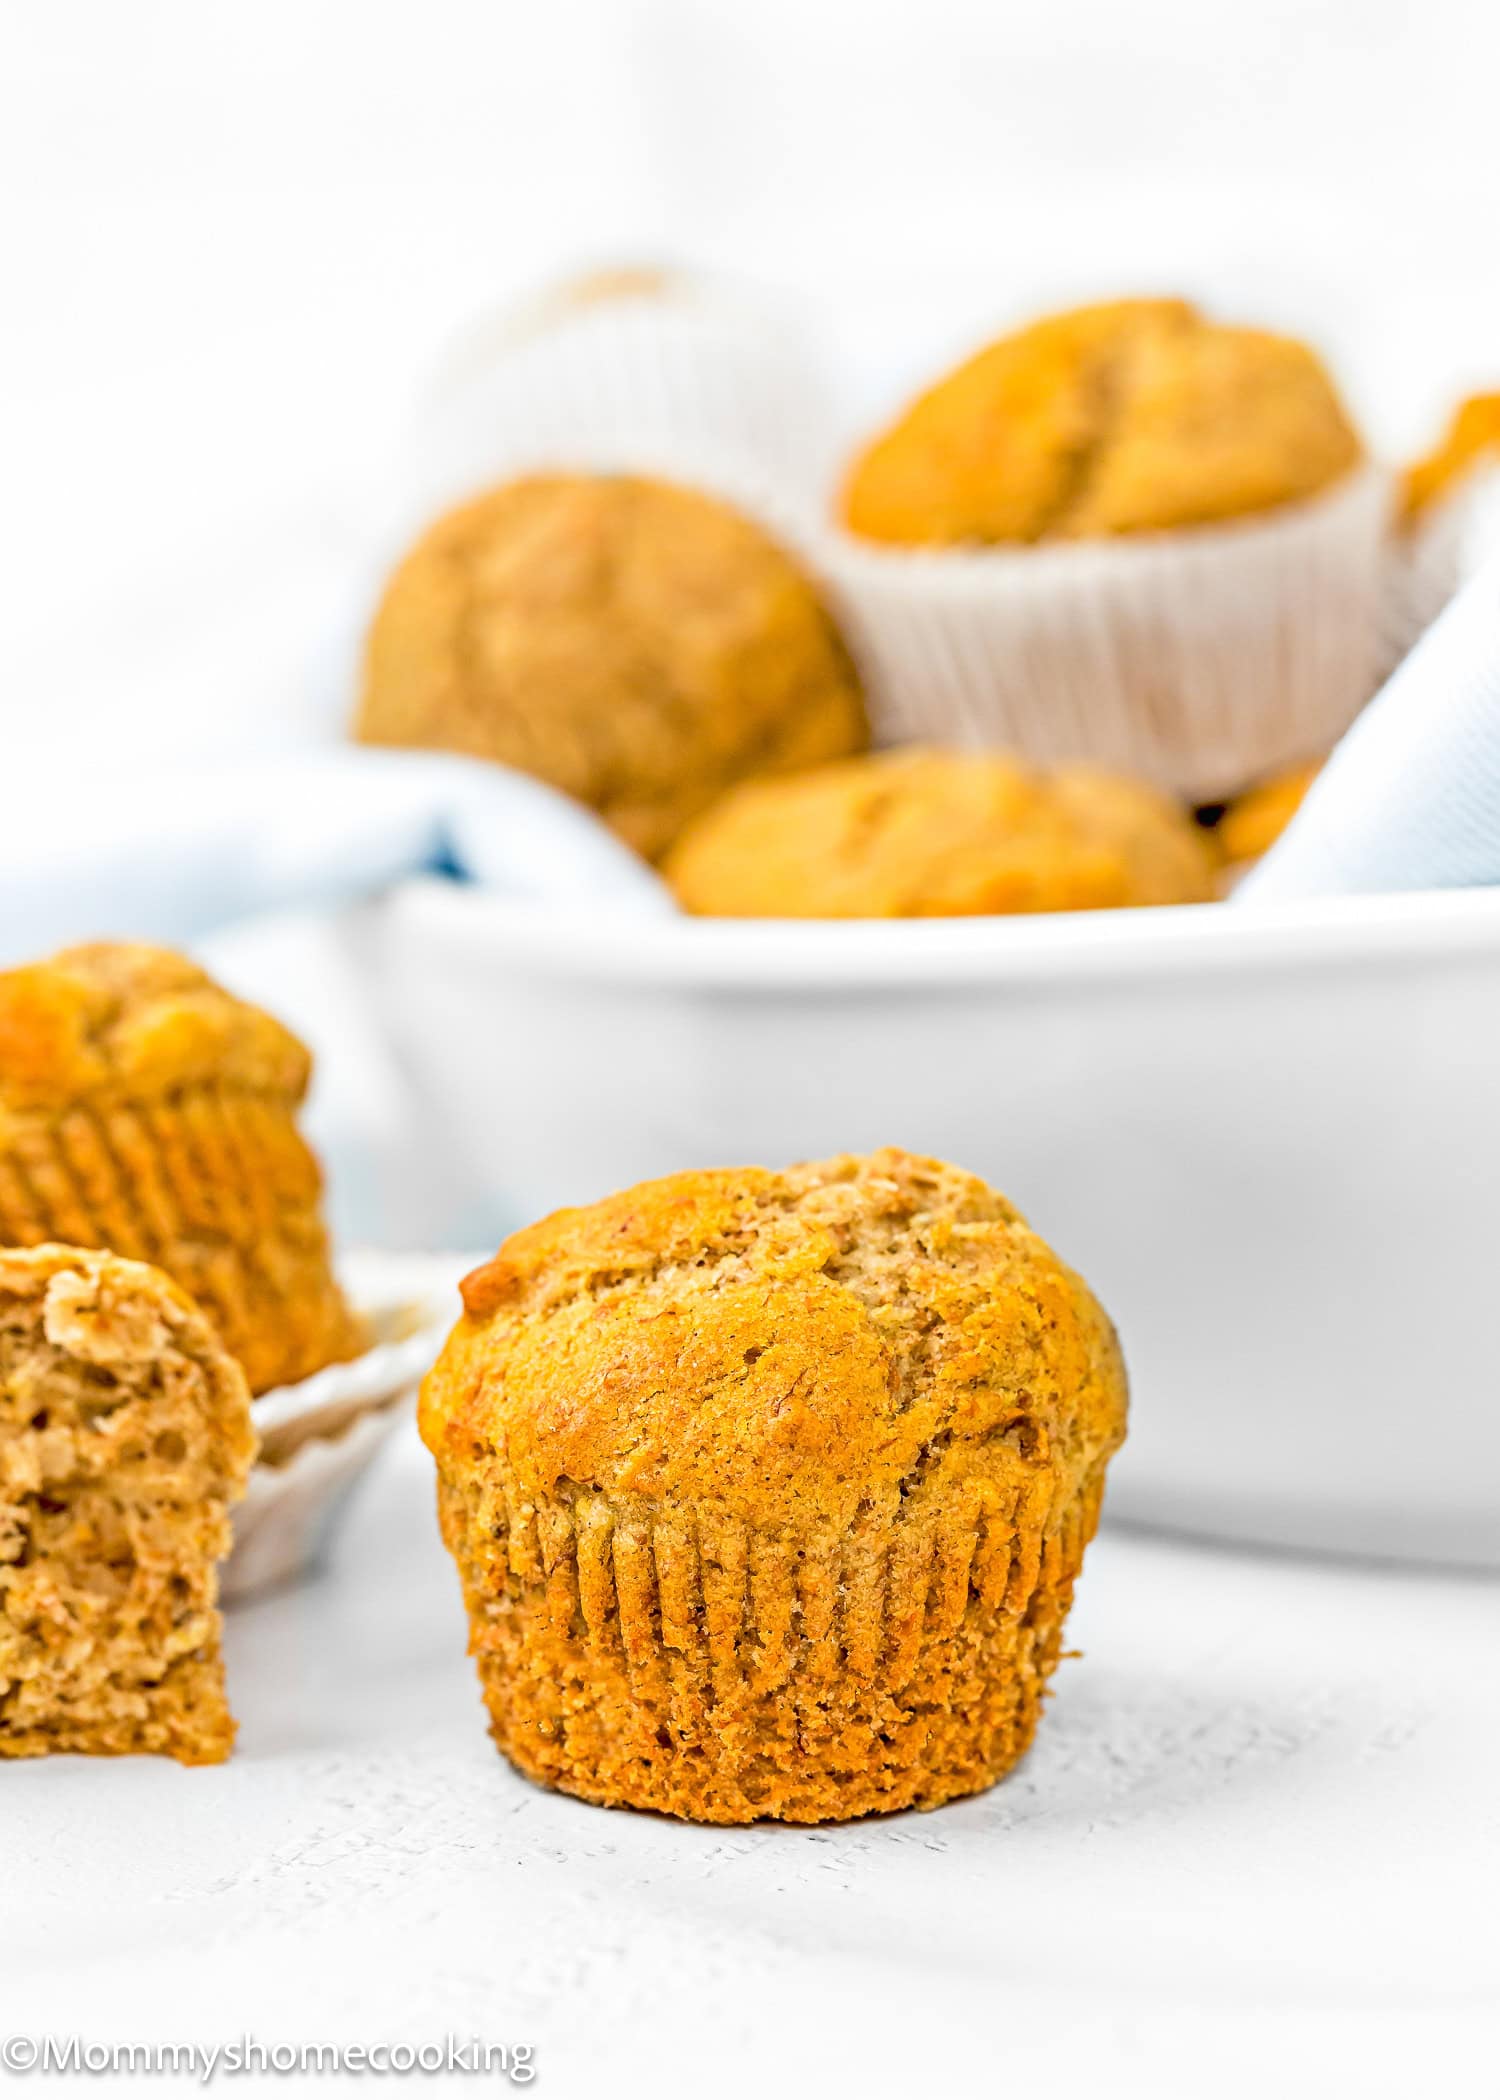 a Healthy Egg-Free, dairy-free and Vegan Mini Banana Muffin over a white surface with more muffins on the background.